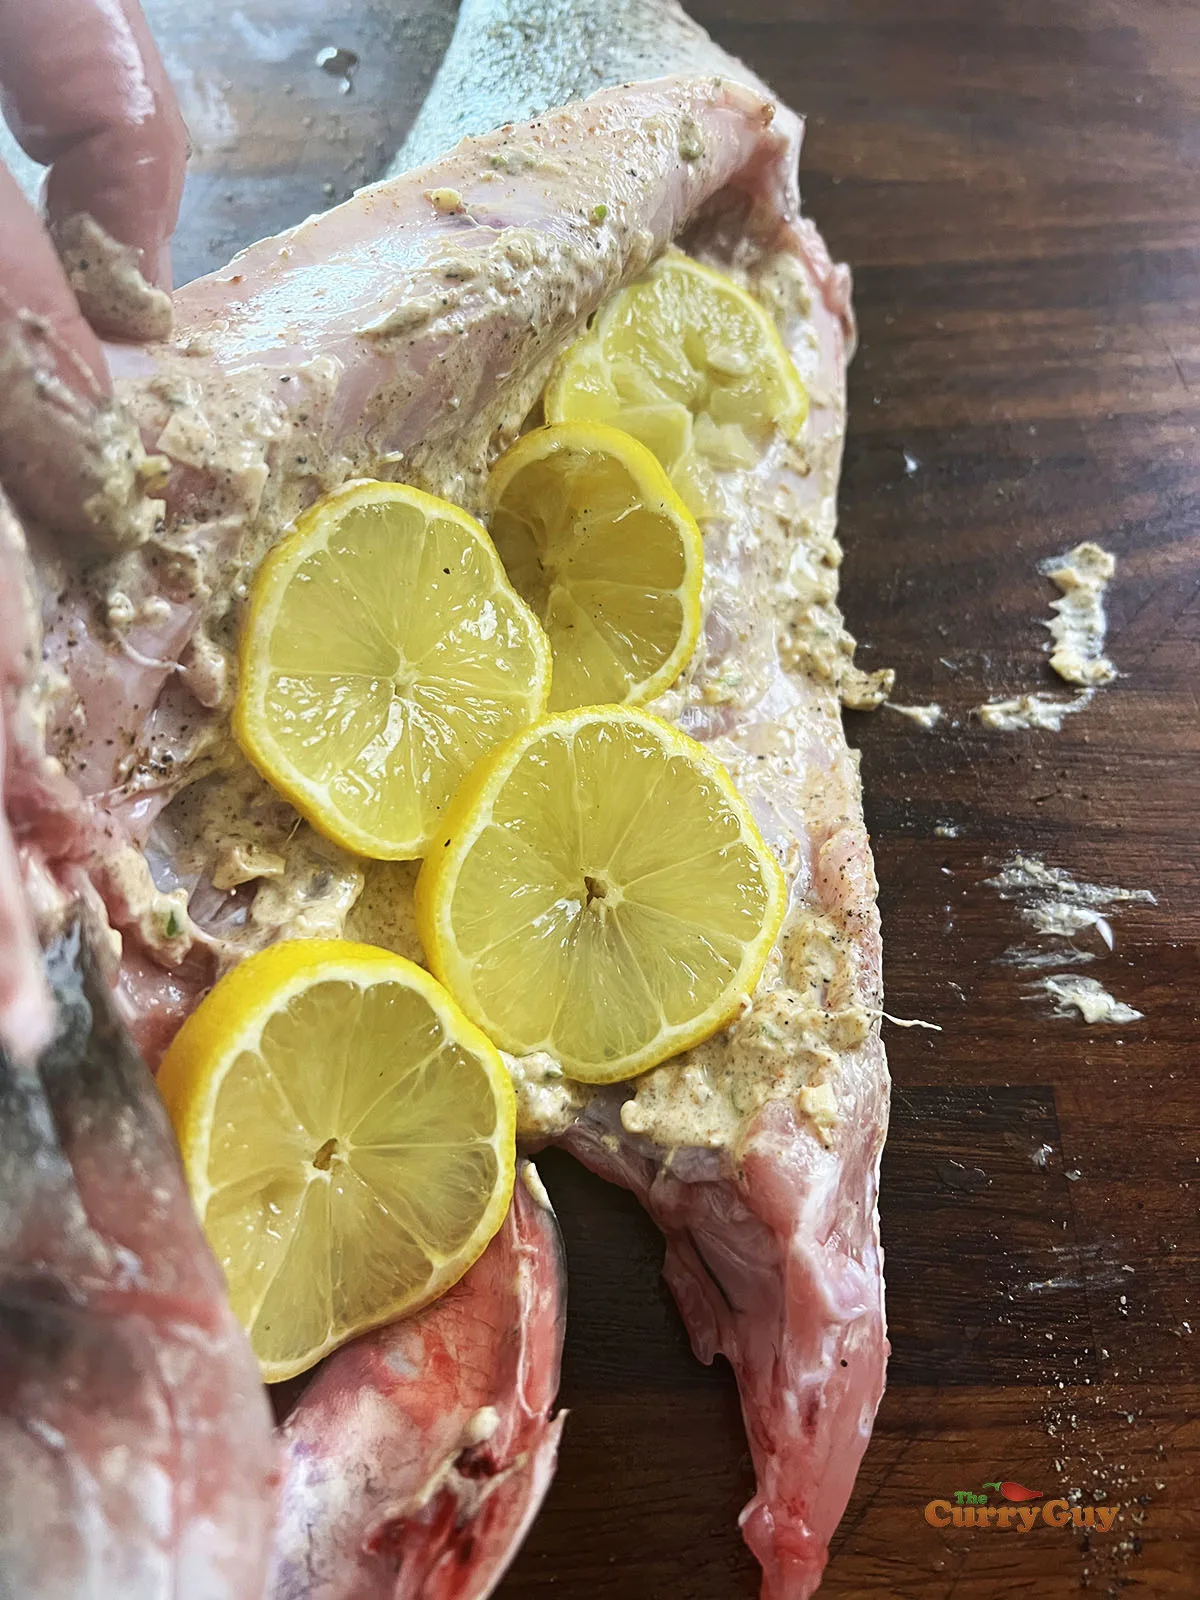 Inside cavity of the fish seasoned with salt and pepper and the marinade and sliced lemons.